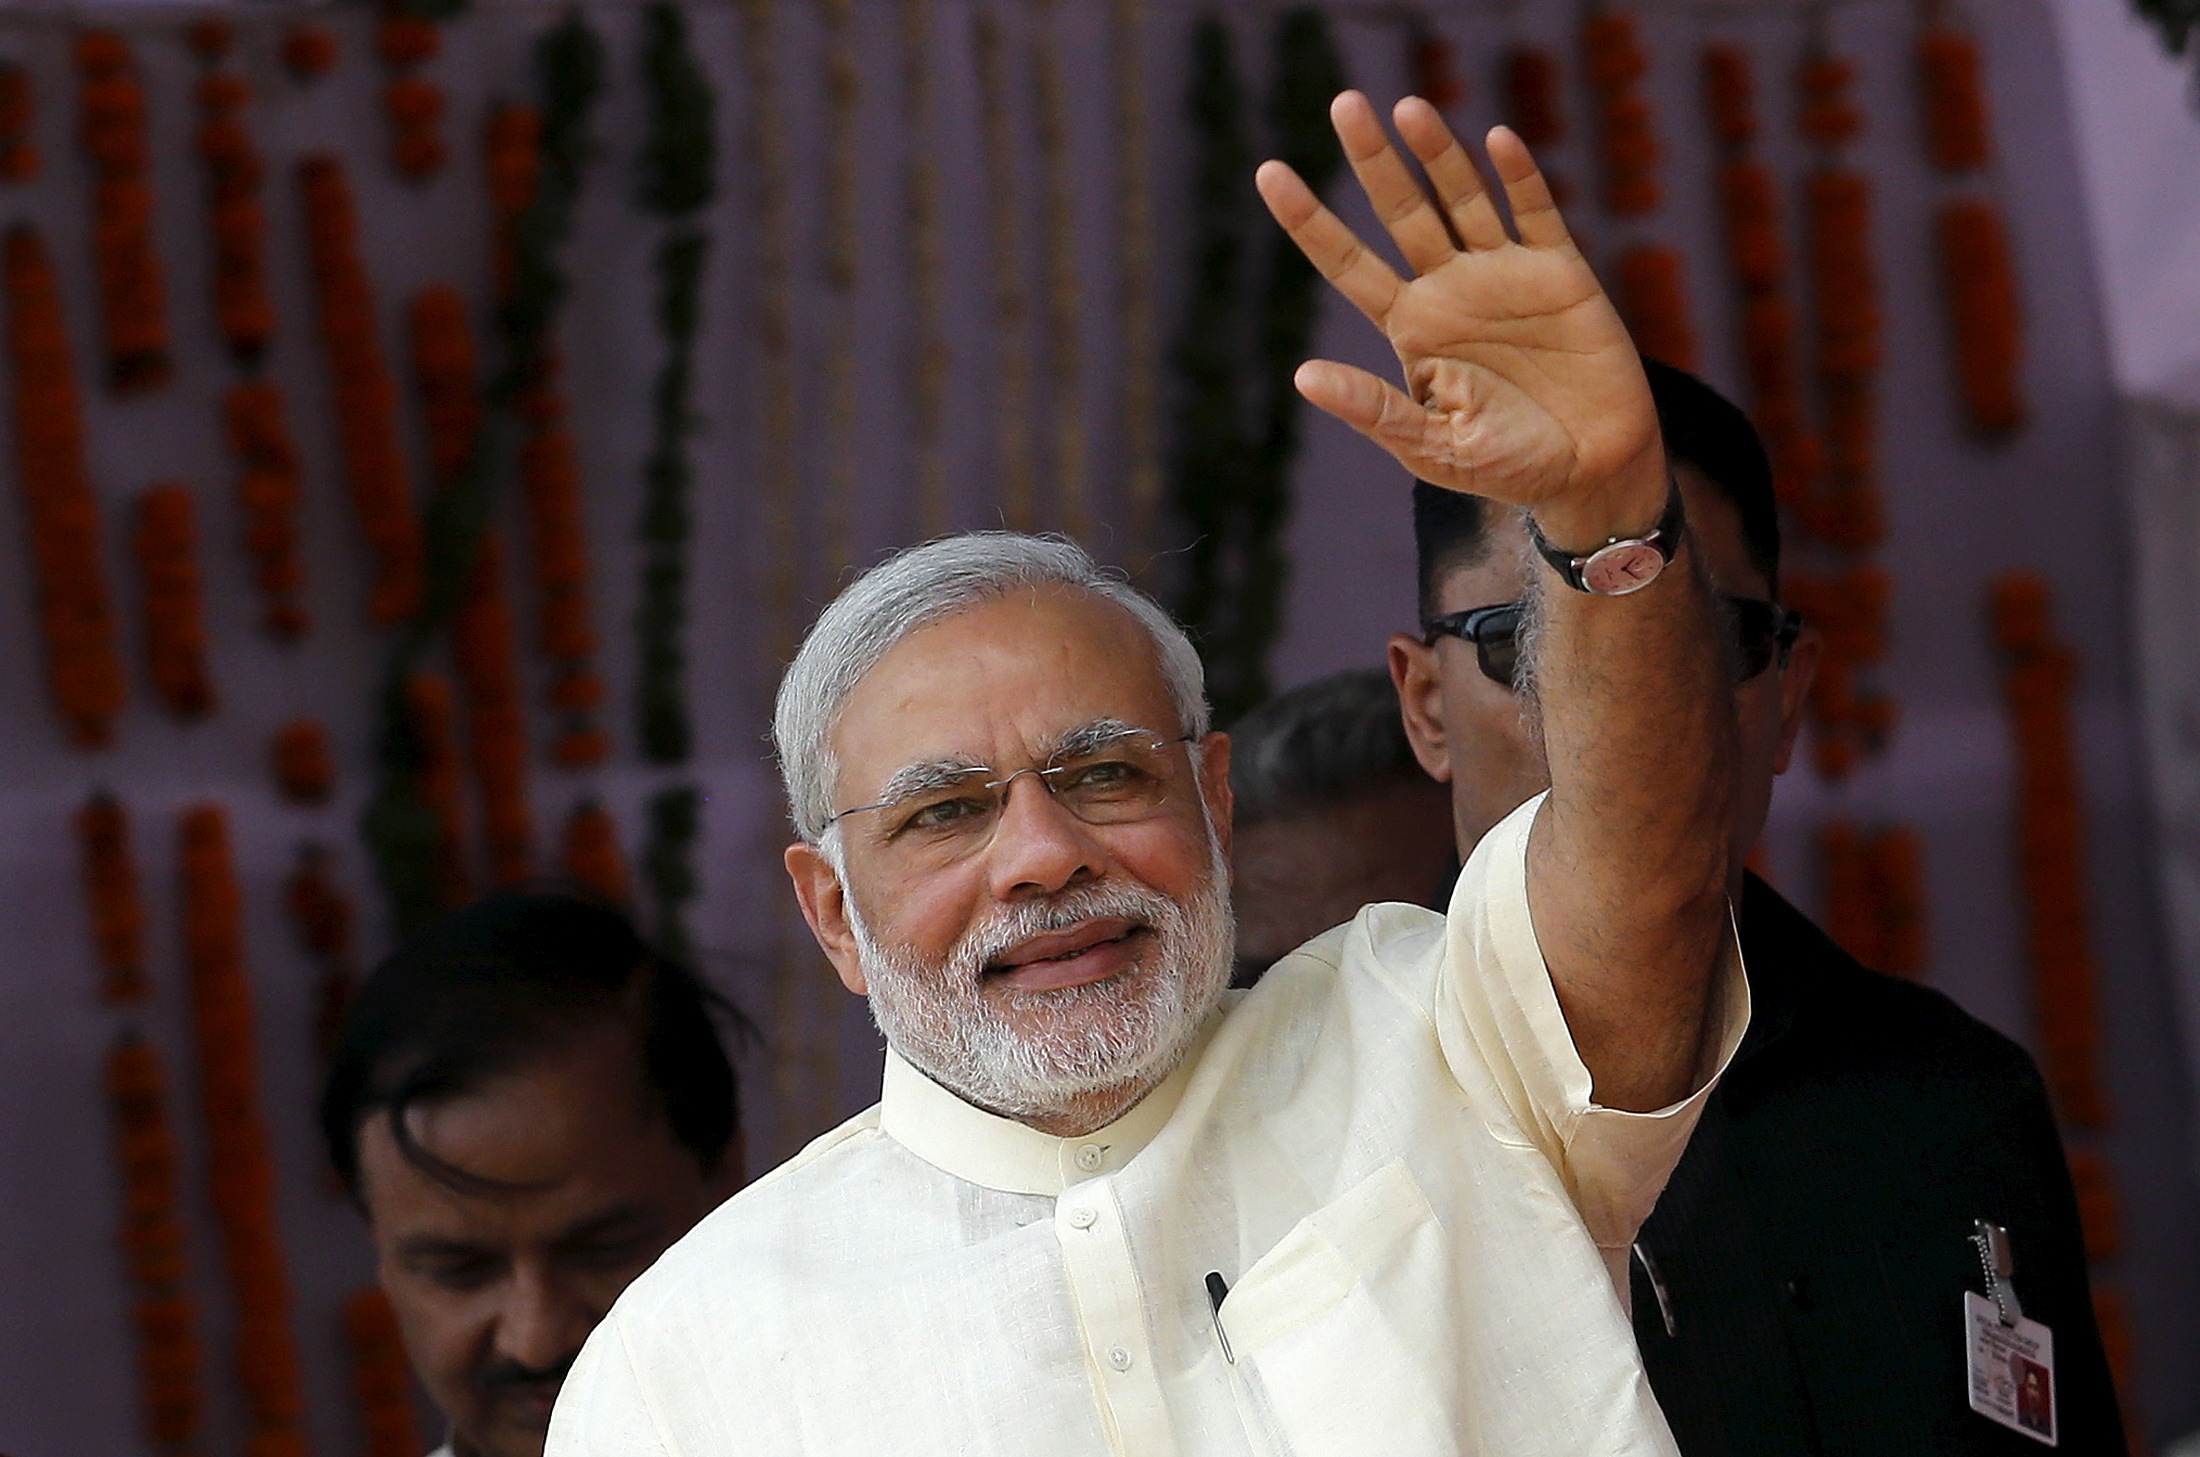 India's Prime Minister Narendra Modi waves towards his supporters during a rally in Mathura, India, May 25, 2015. (Adnan Abidi—Reuters)